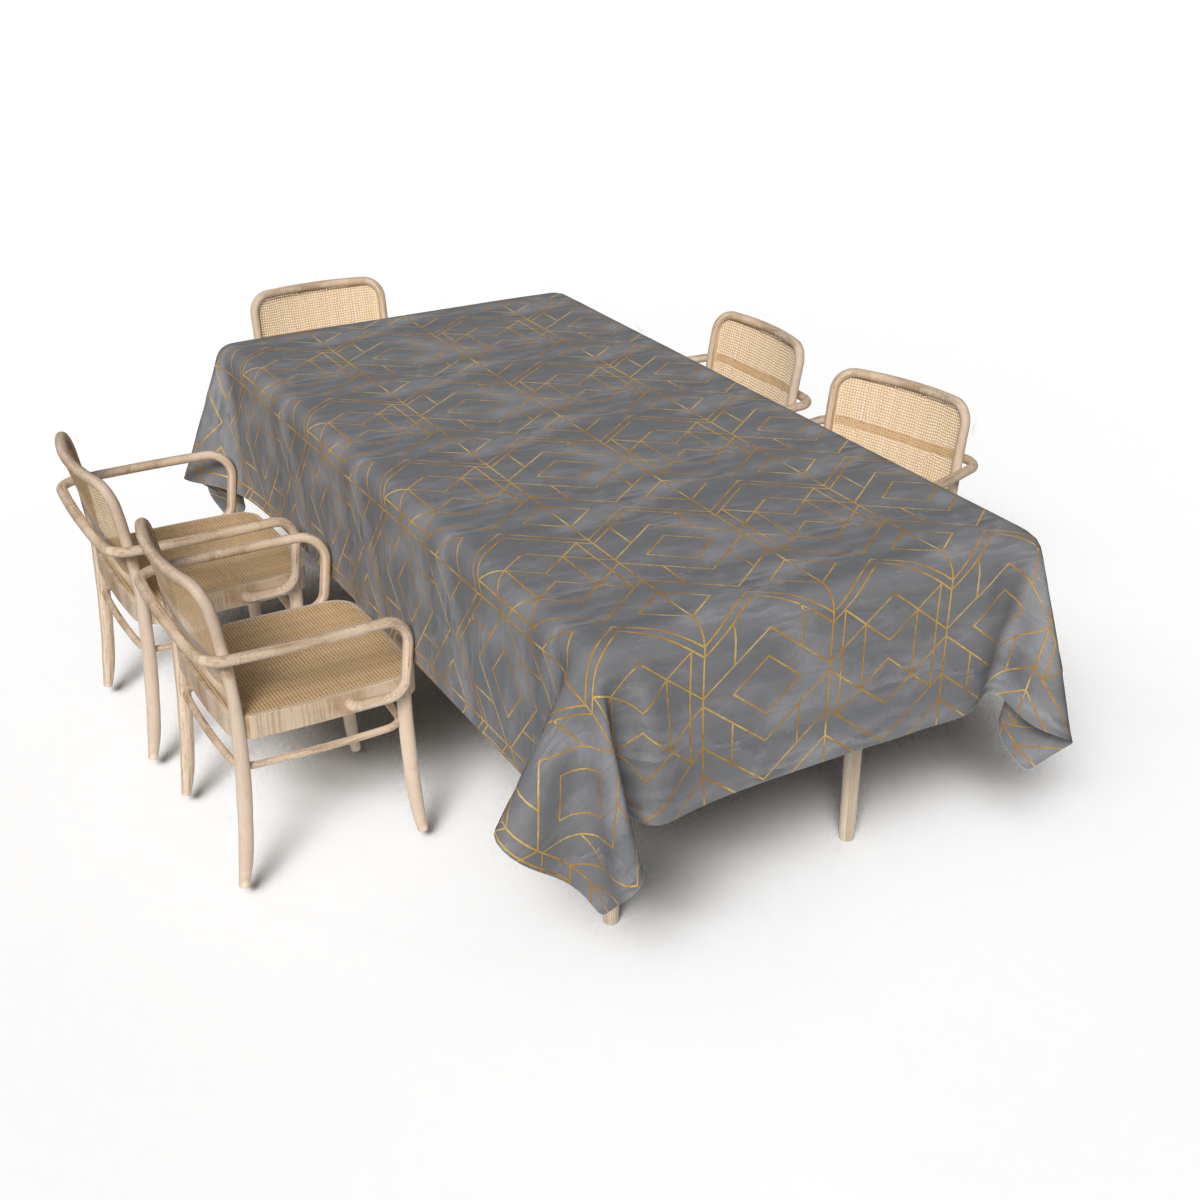 Table cloth - multiple sizes - ROM569